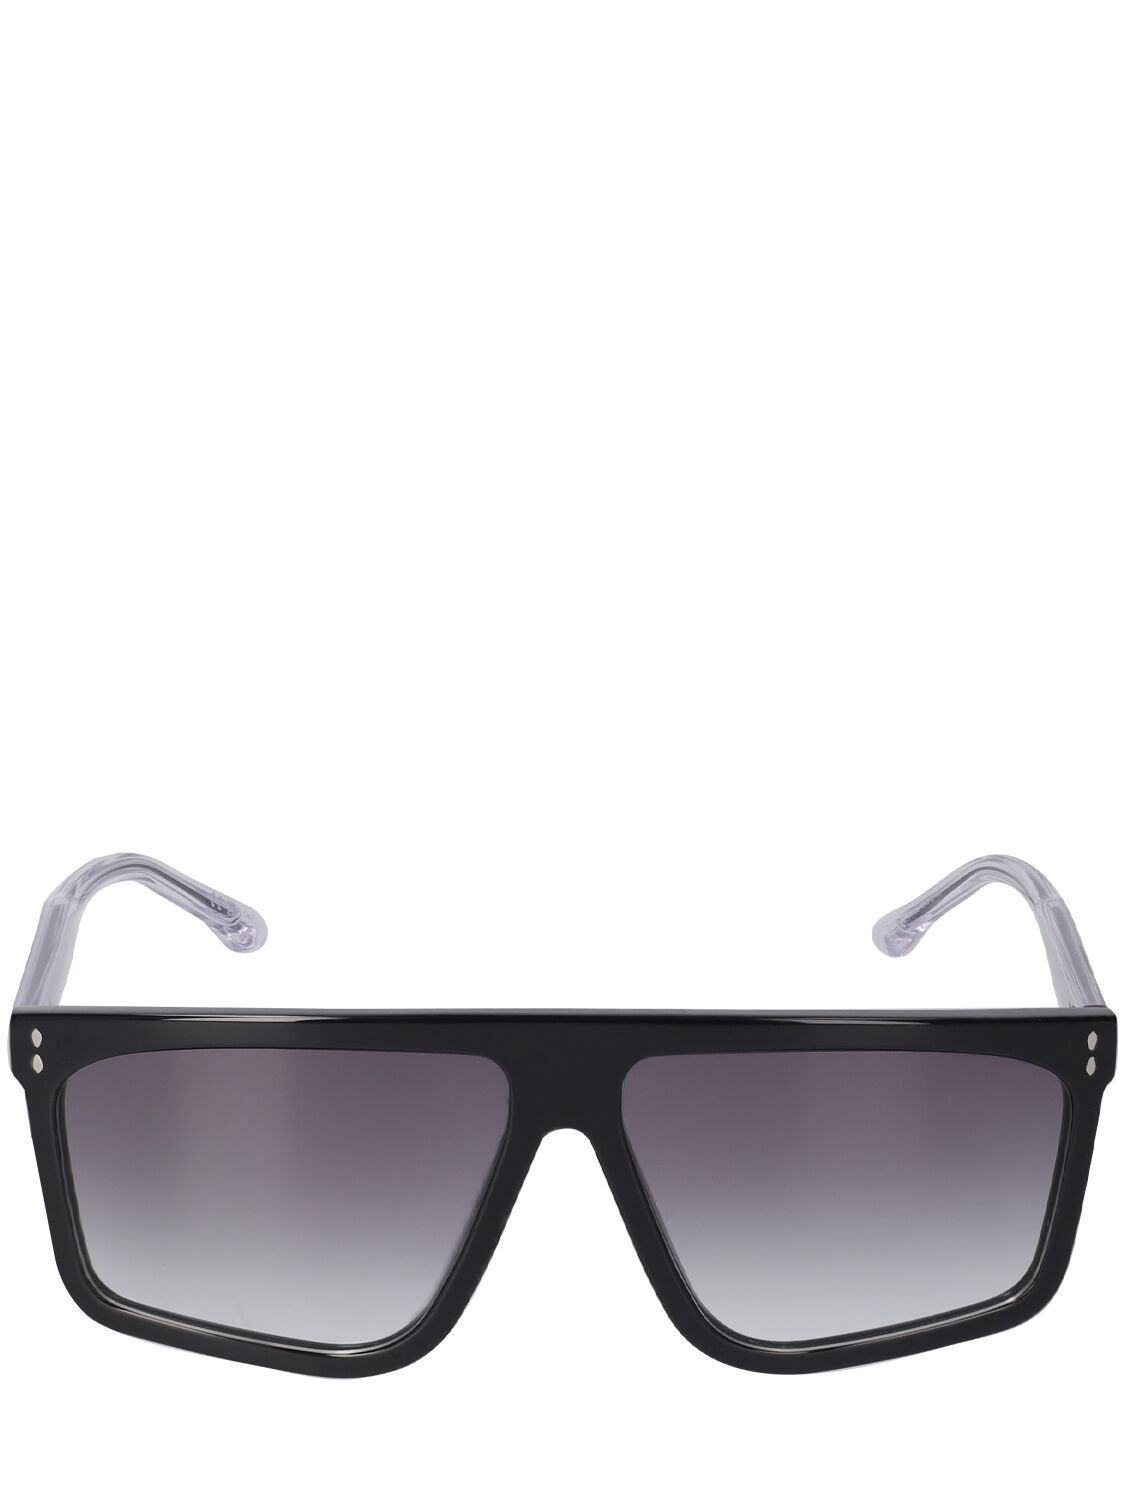 Isabel Marant The In Love Squared Acetate Sunglasses In 黑色,灰色